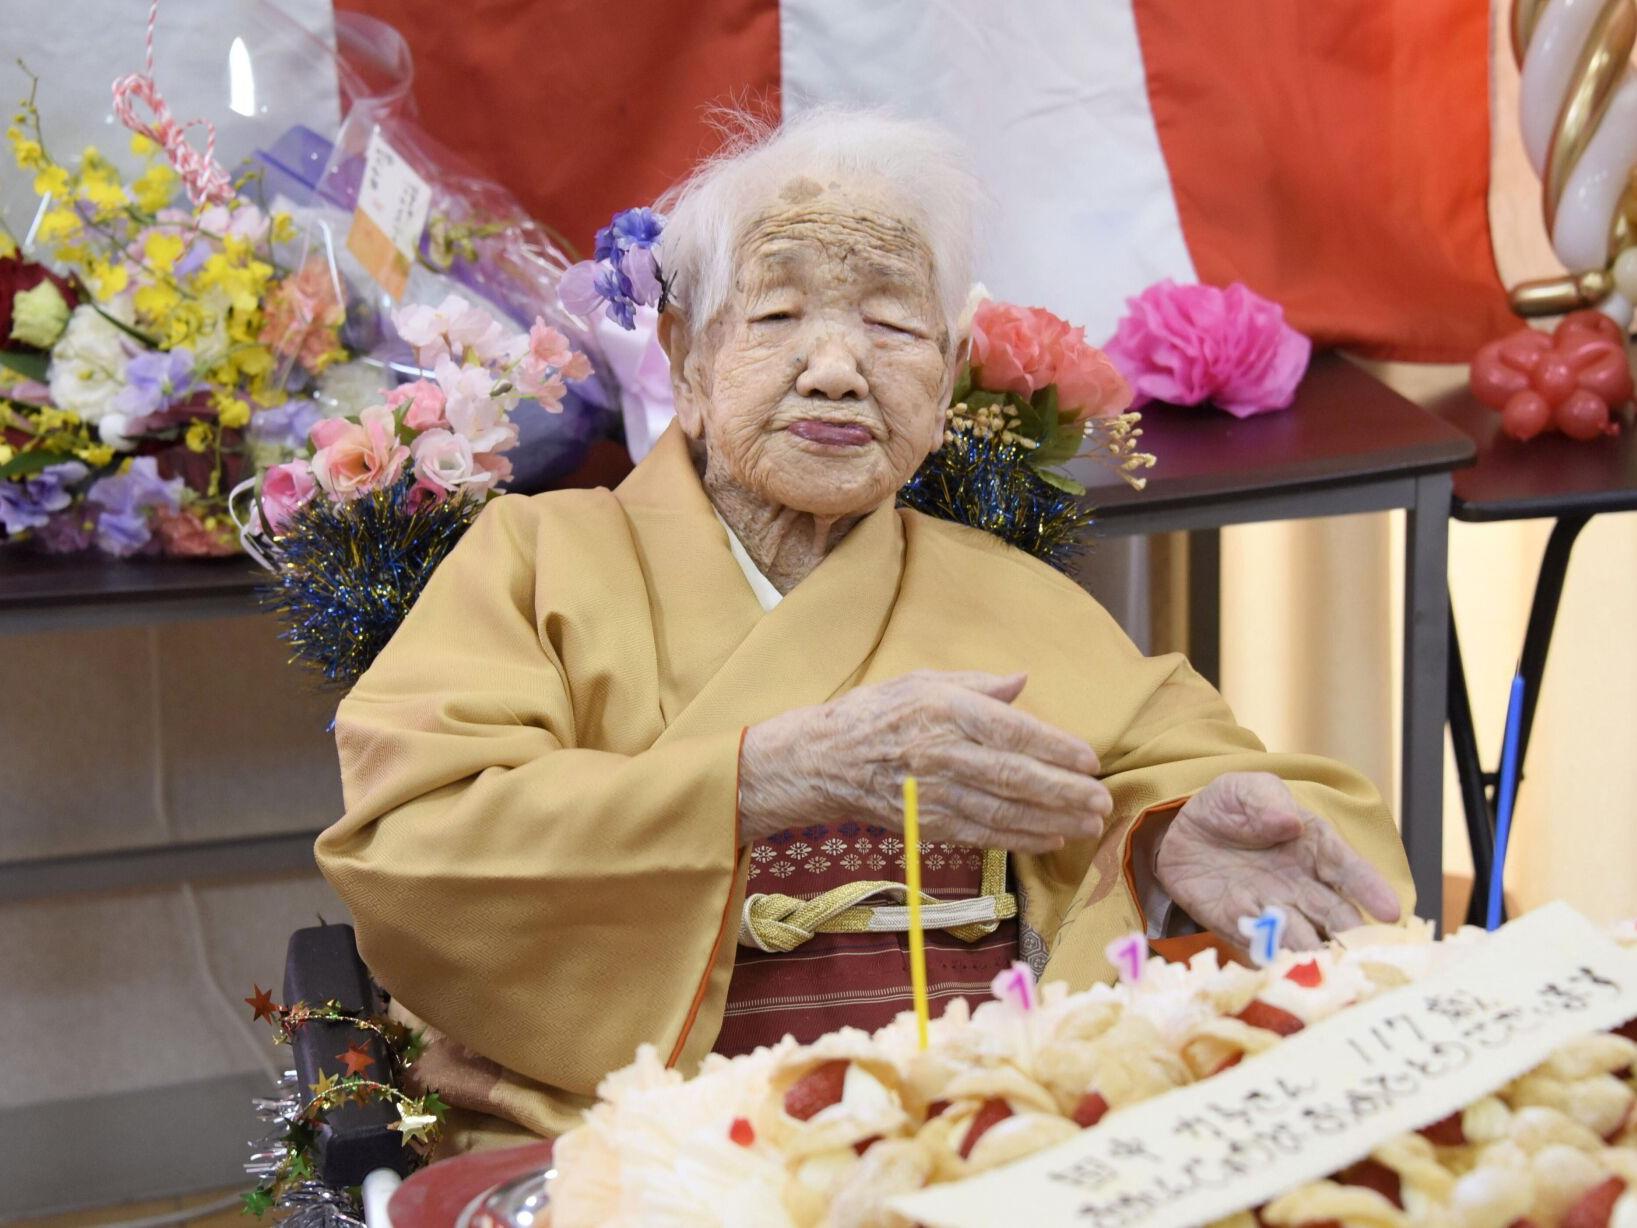 Kane Tanaka, the world's oldest living person, turns 119 | News | waow.com